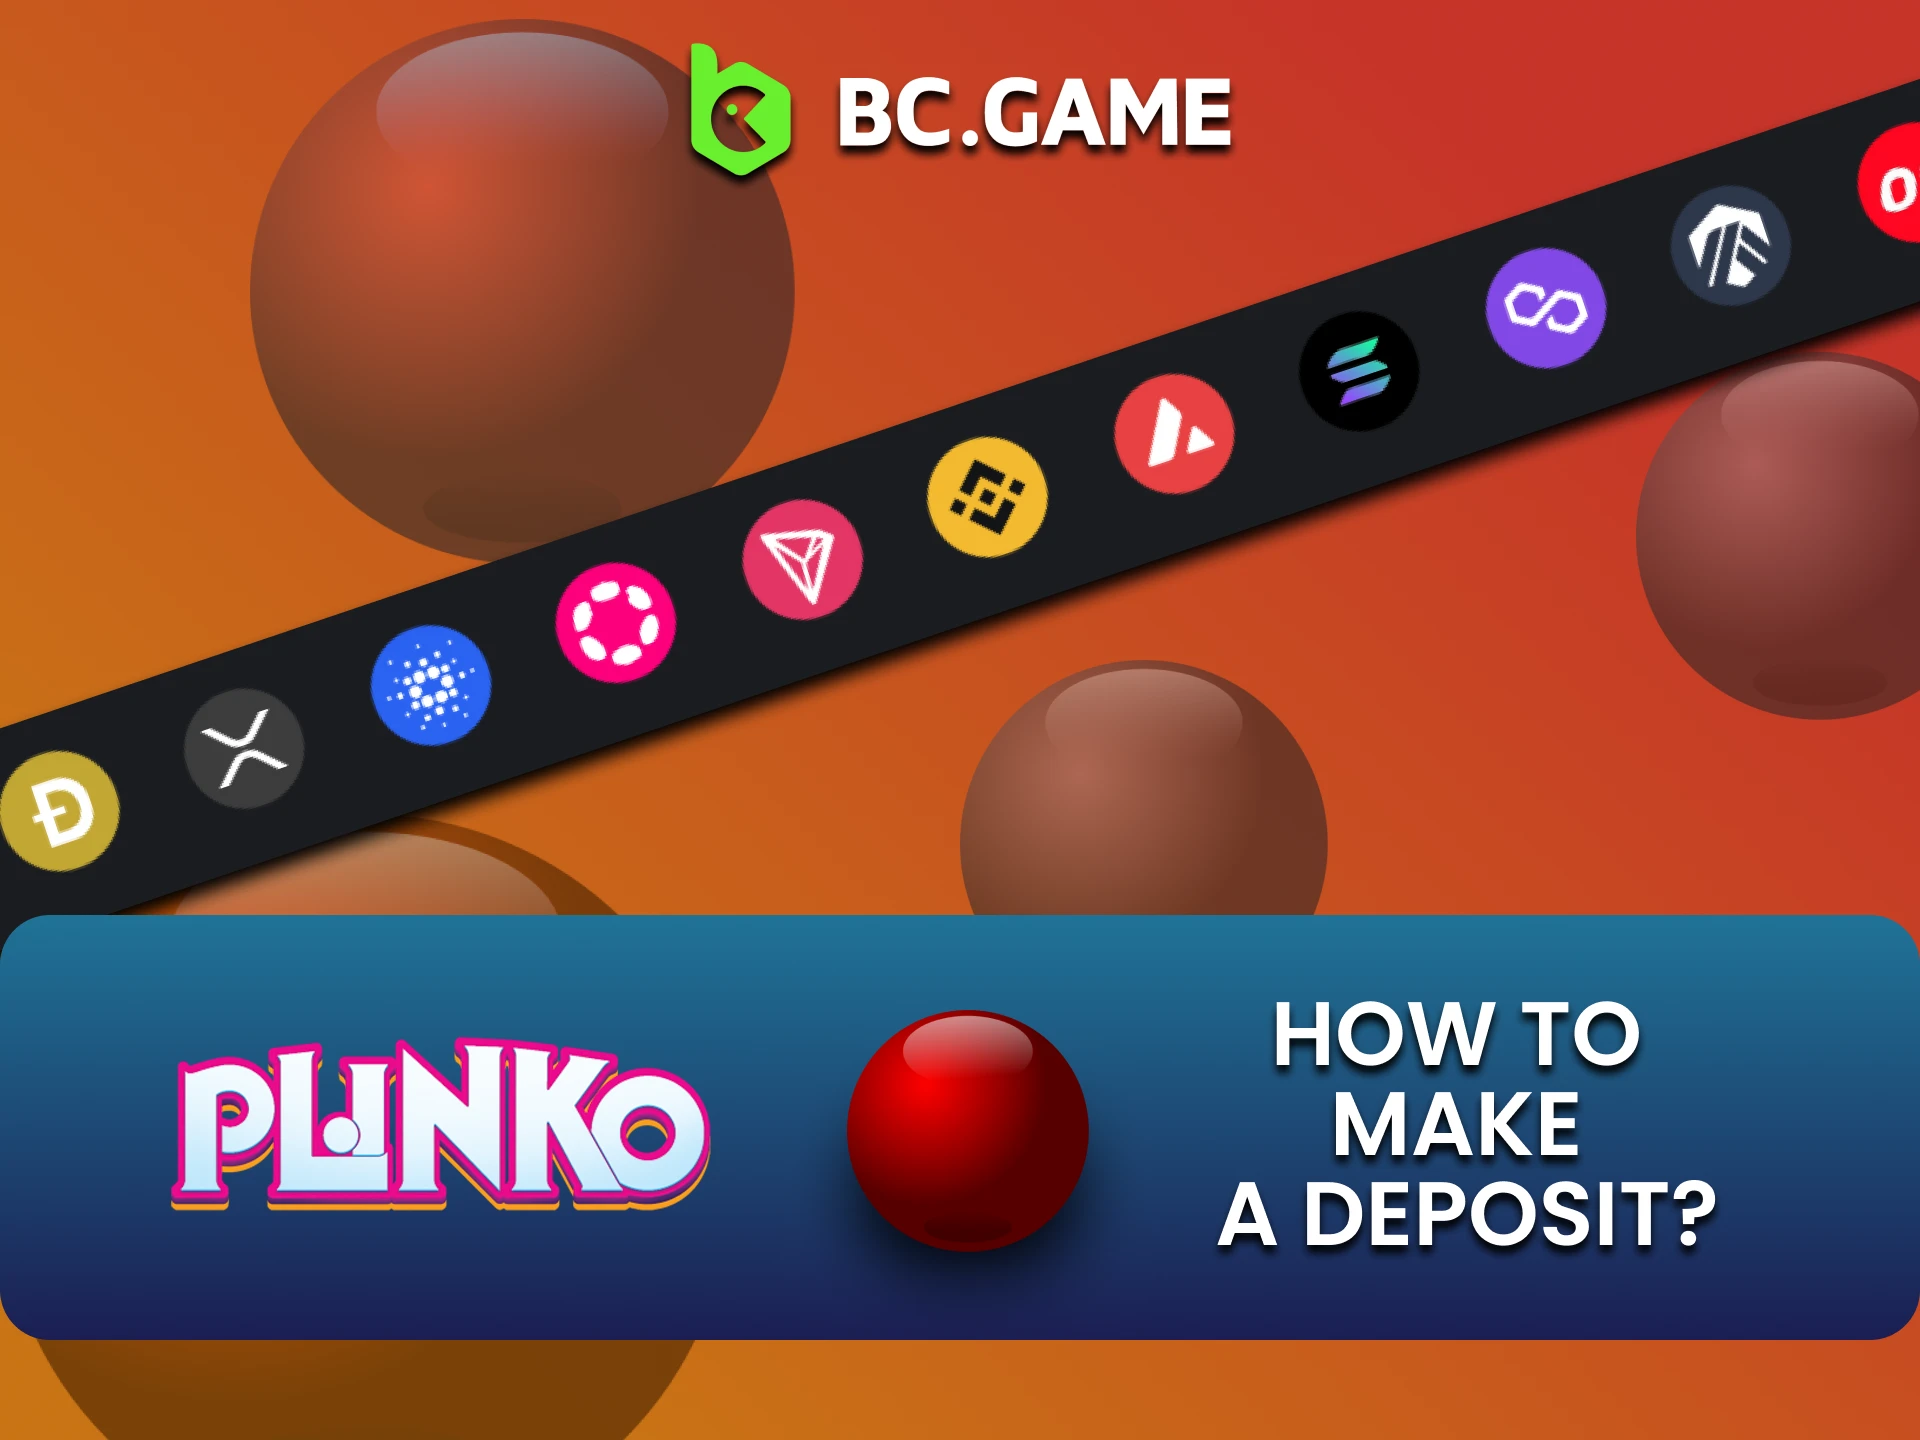 We’ll tell you how to top up your funds for playing Plinko on BCGame.